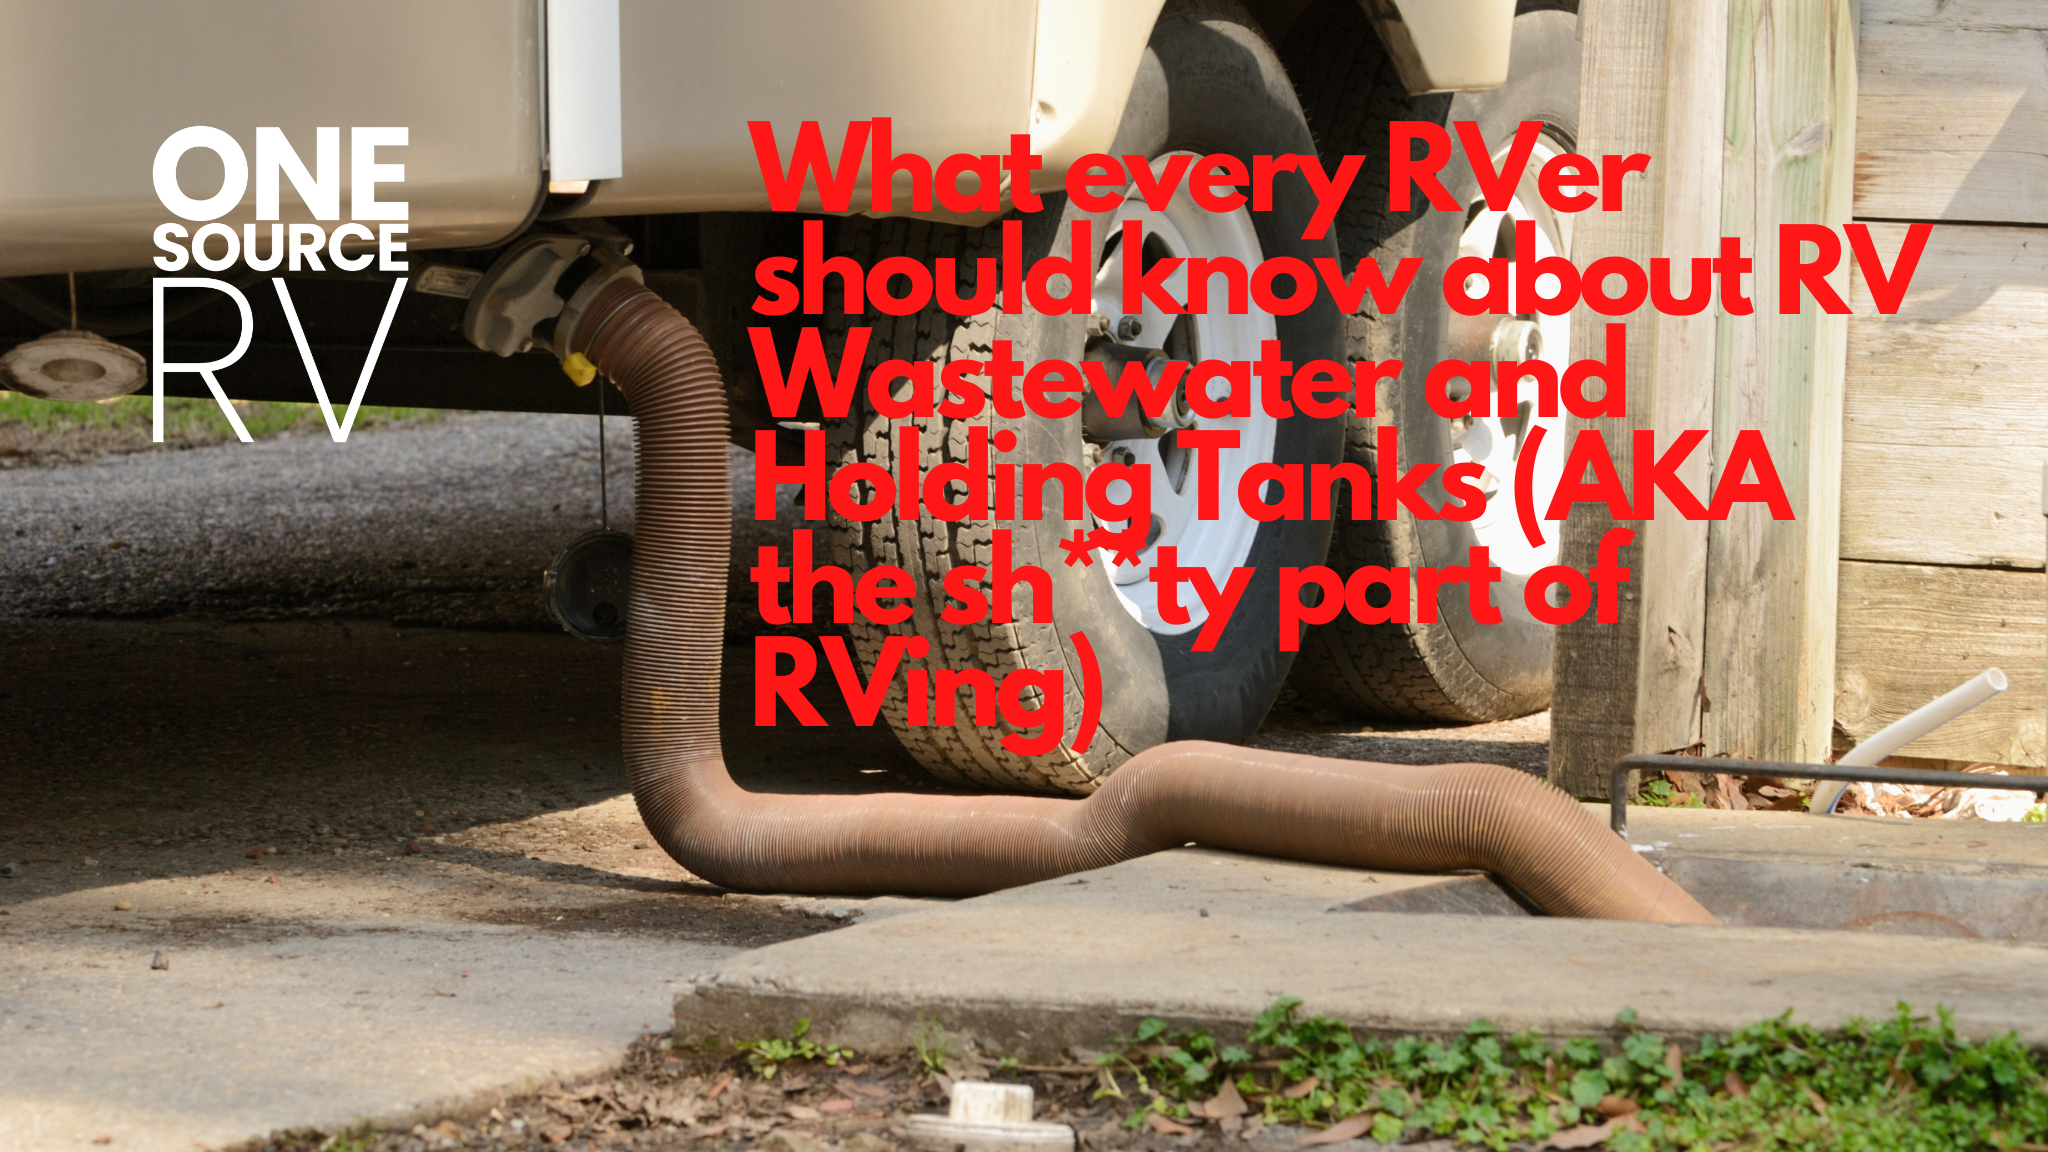 What every RVer should know about RV Wastewater and Holding Tanks (AKA the sh**ty part of RVing)